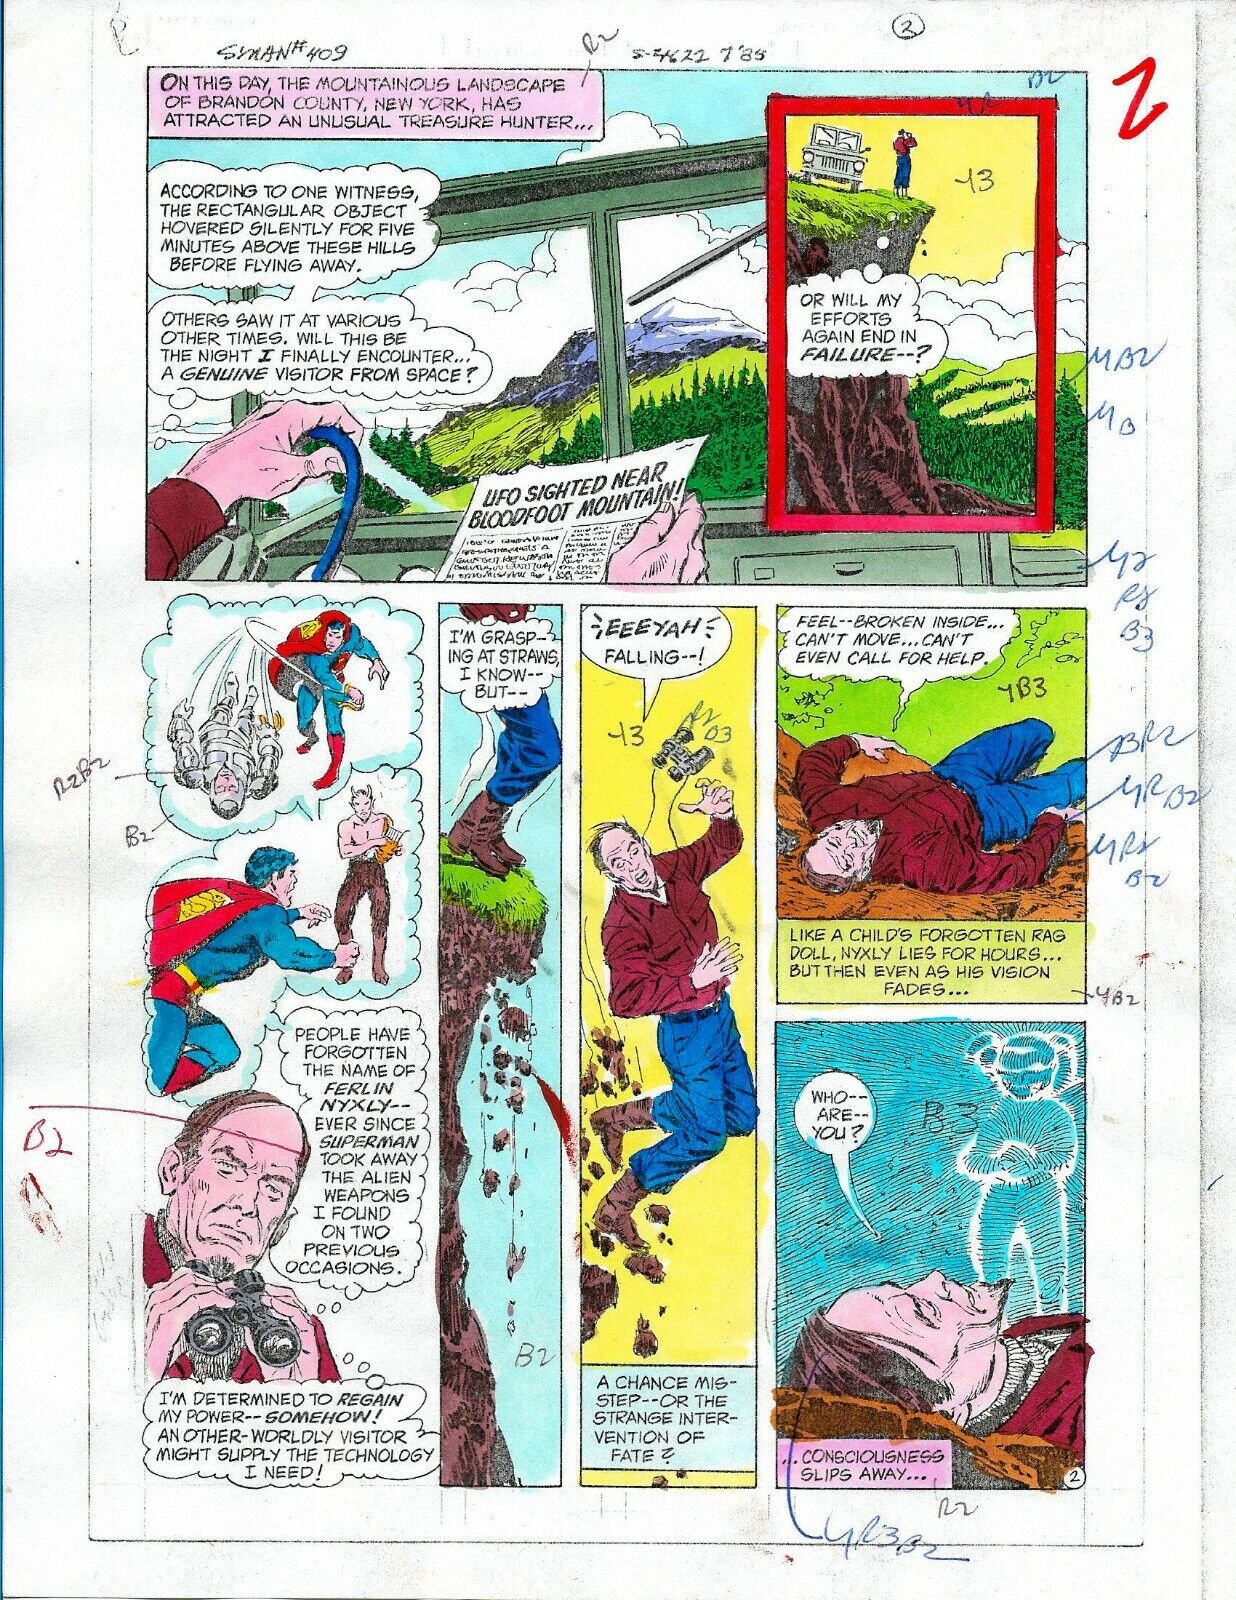 Original 1985 Superman DC color guide art page: Used in production of comic book